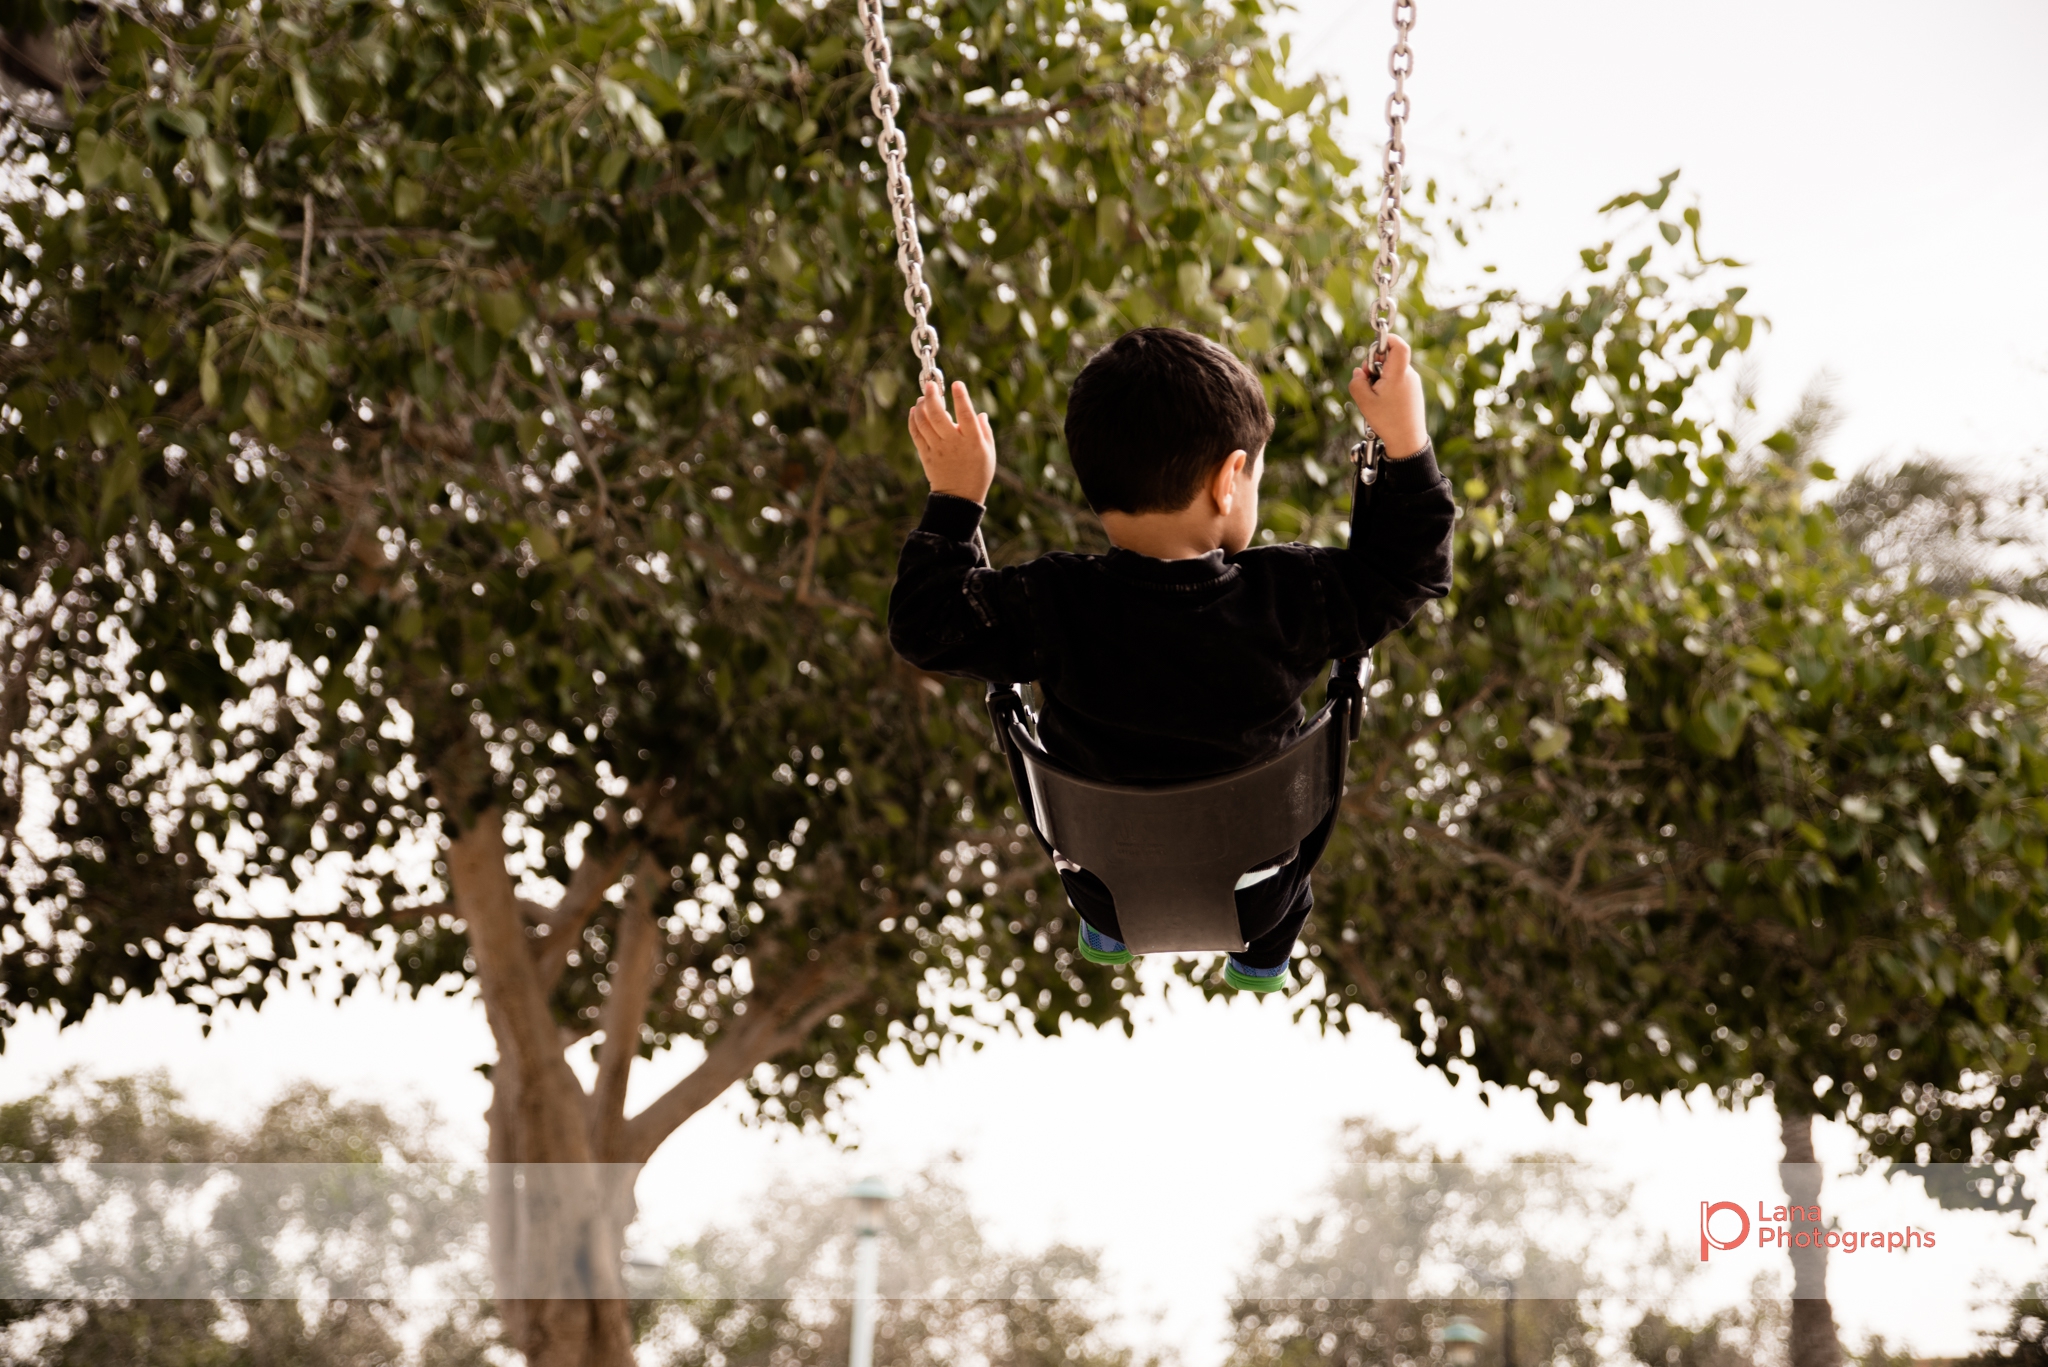 Dubai Family Photographer little boy swinging on the swings with his back to the camera in Umm suqeim park Dubai